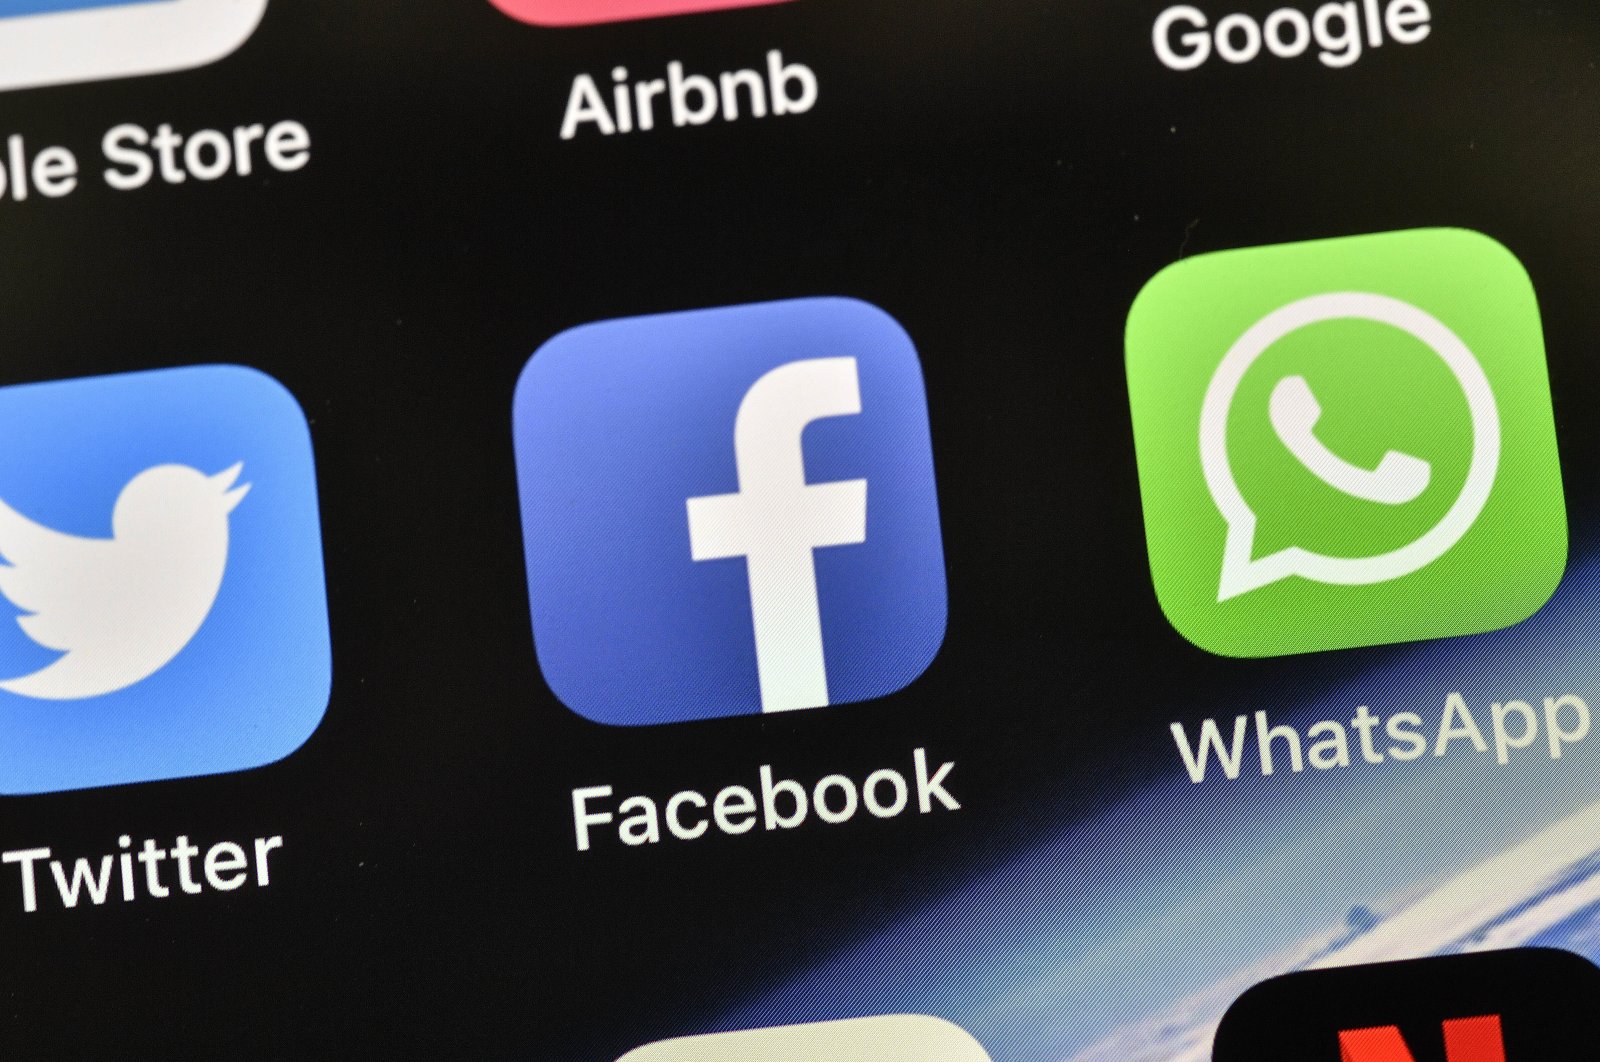 The icons of Facebook and WhatsApp are pictured on a phone in Gelsenkirchen, Germany, Nov. 15, 2018. (AP Photo)